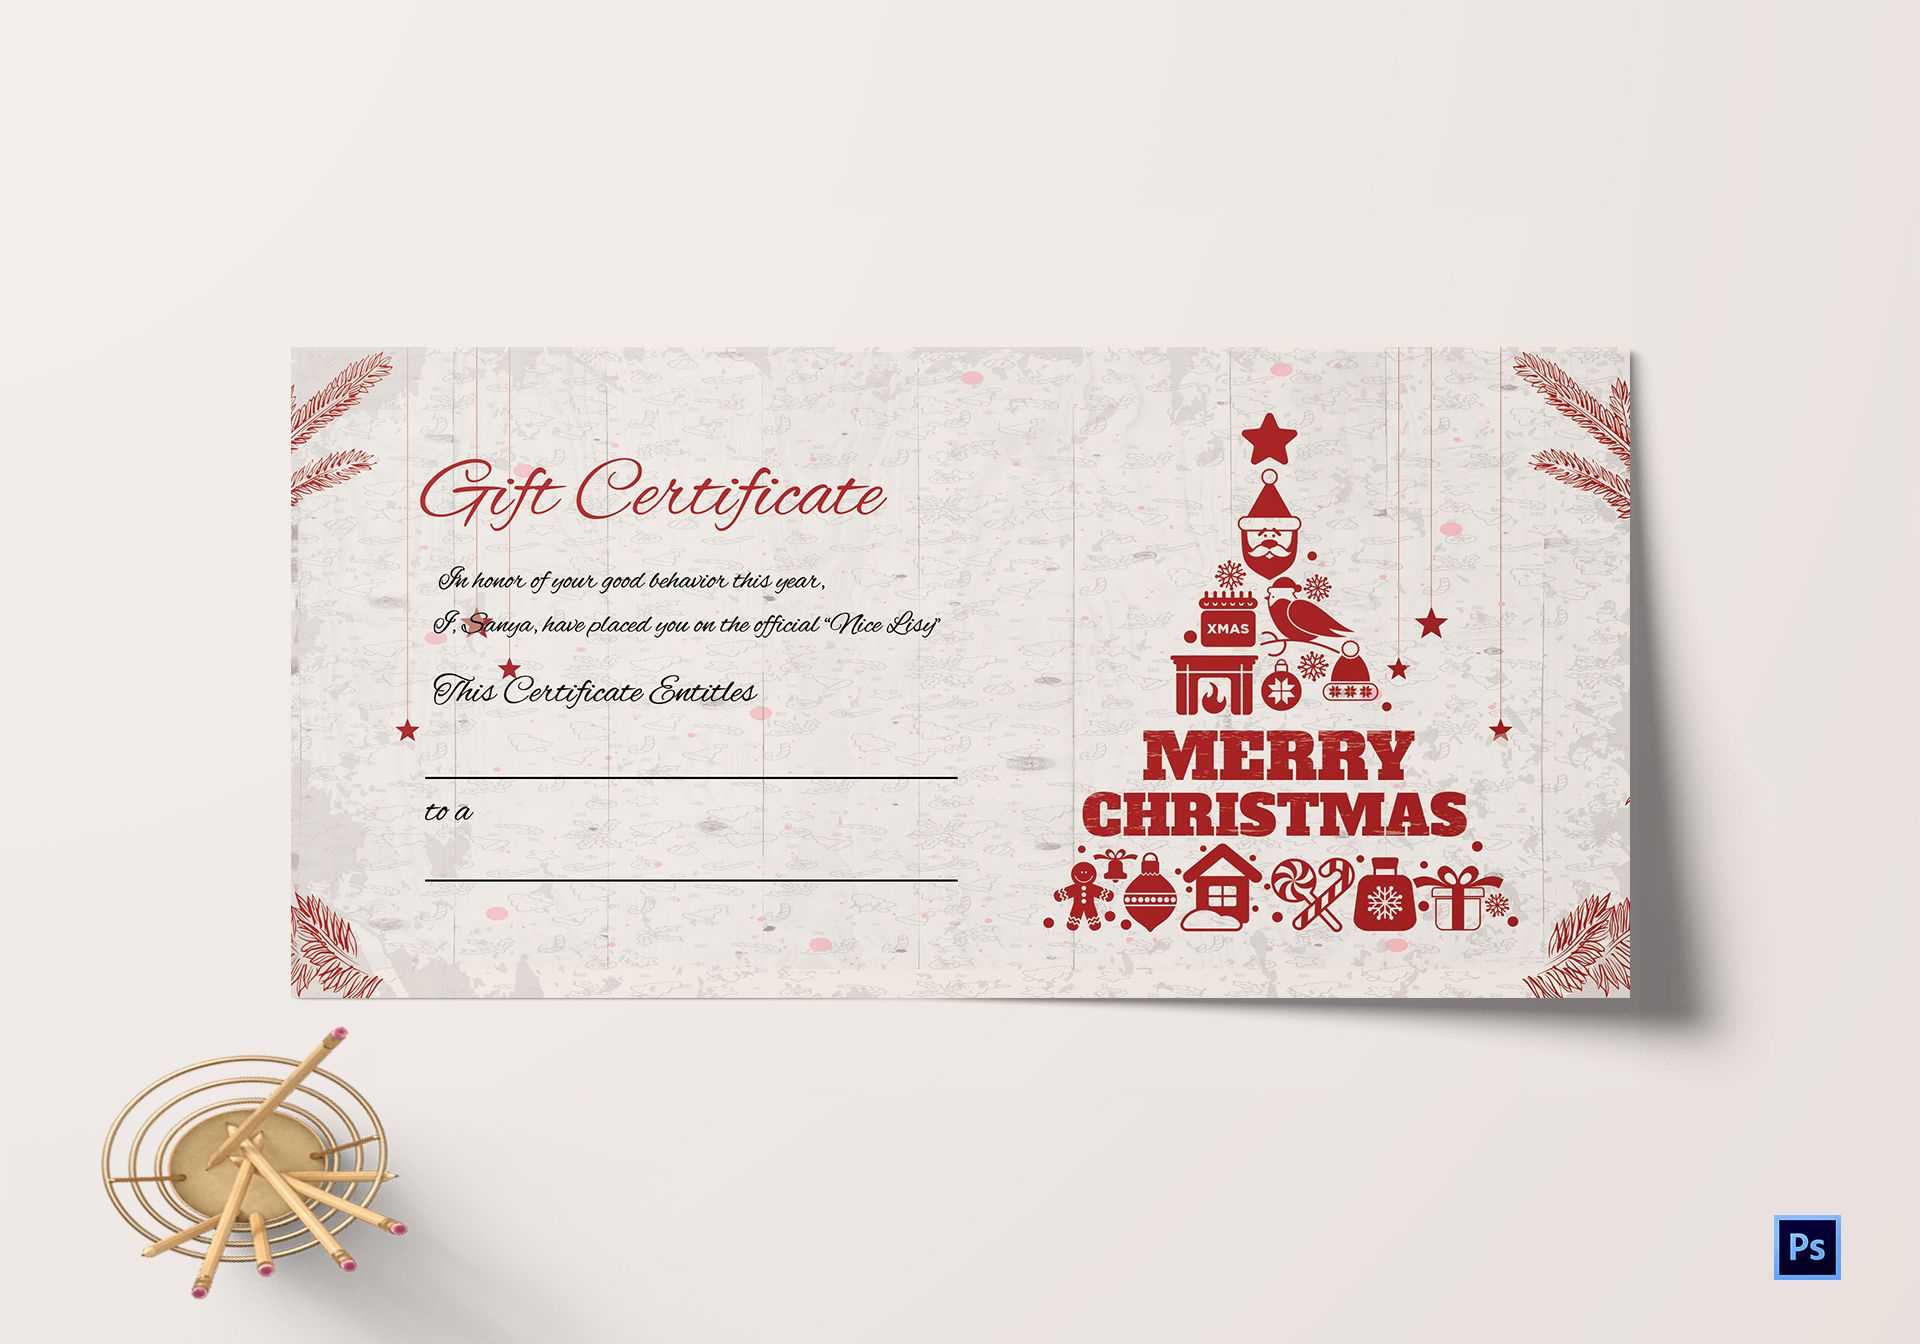 Merry Christmas Gift Certificate With Regard To Merry Christmas Gift Certificate Templates